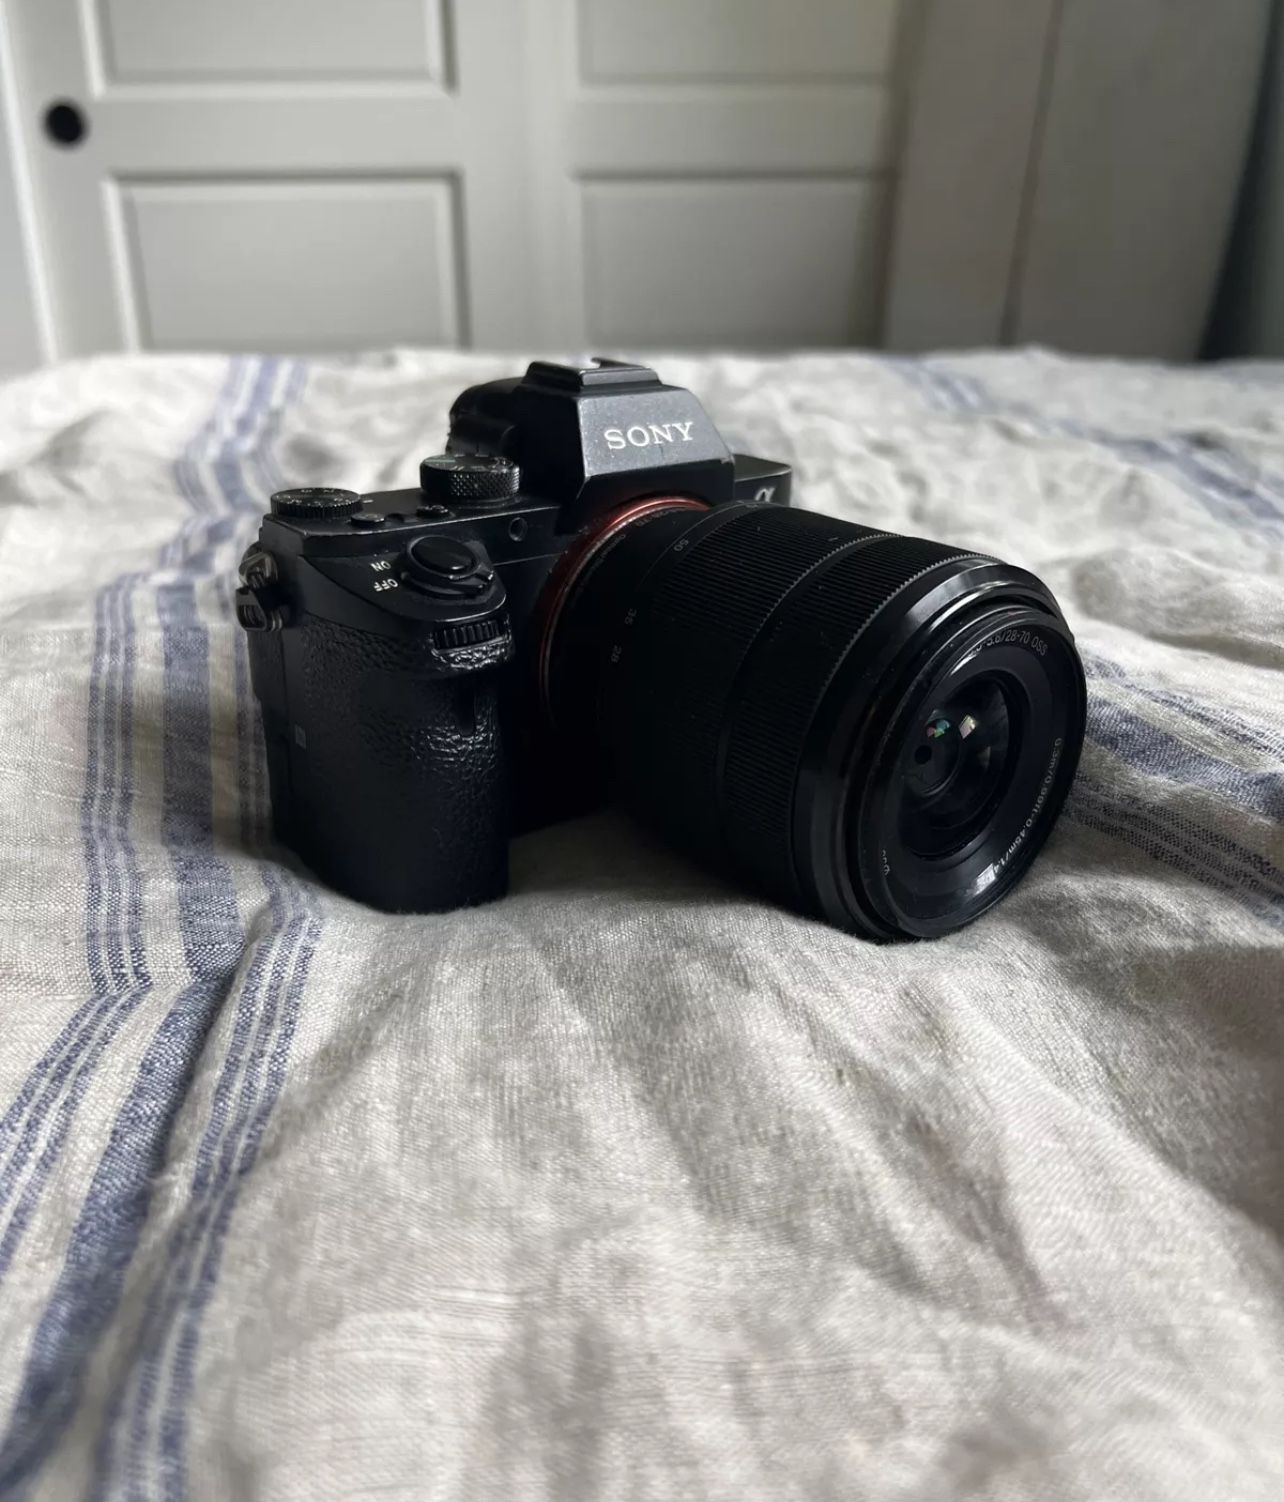 Sony Alpha α7 II Mirrorless Camera with 28-70mm Zoom Lens & accessories  